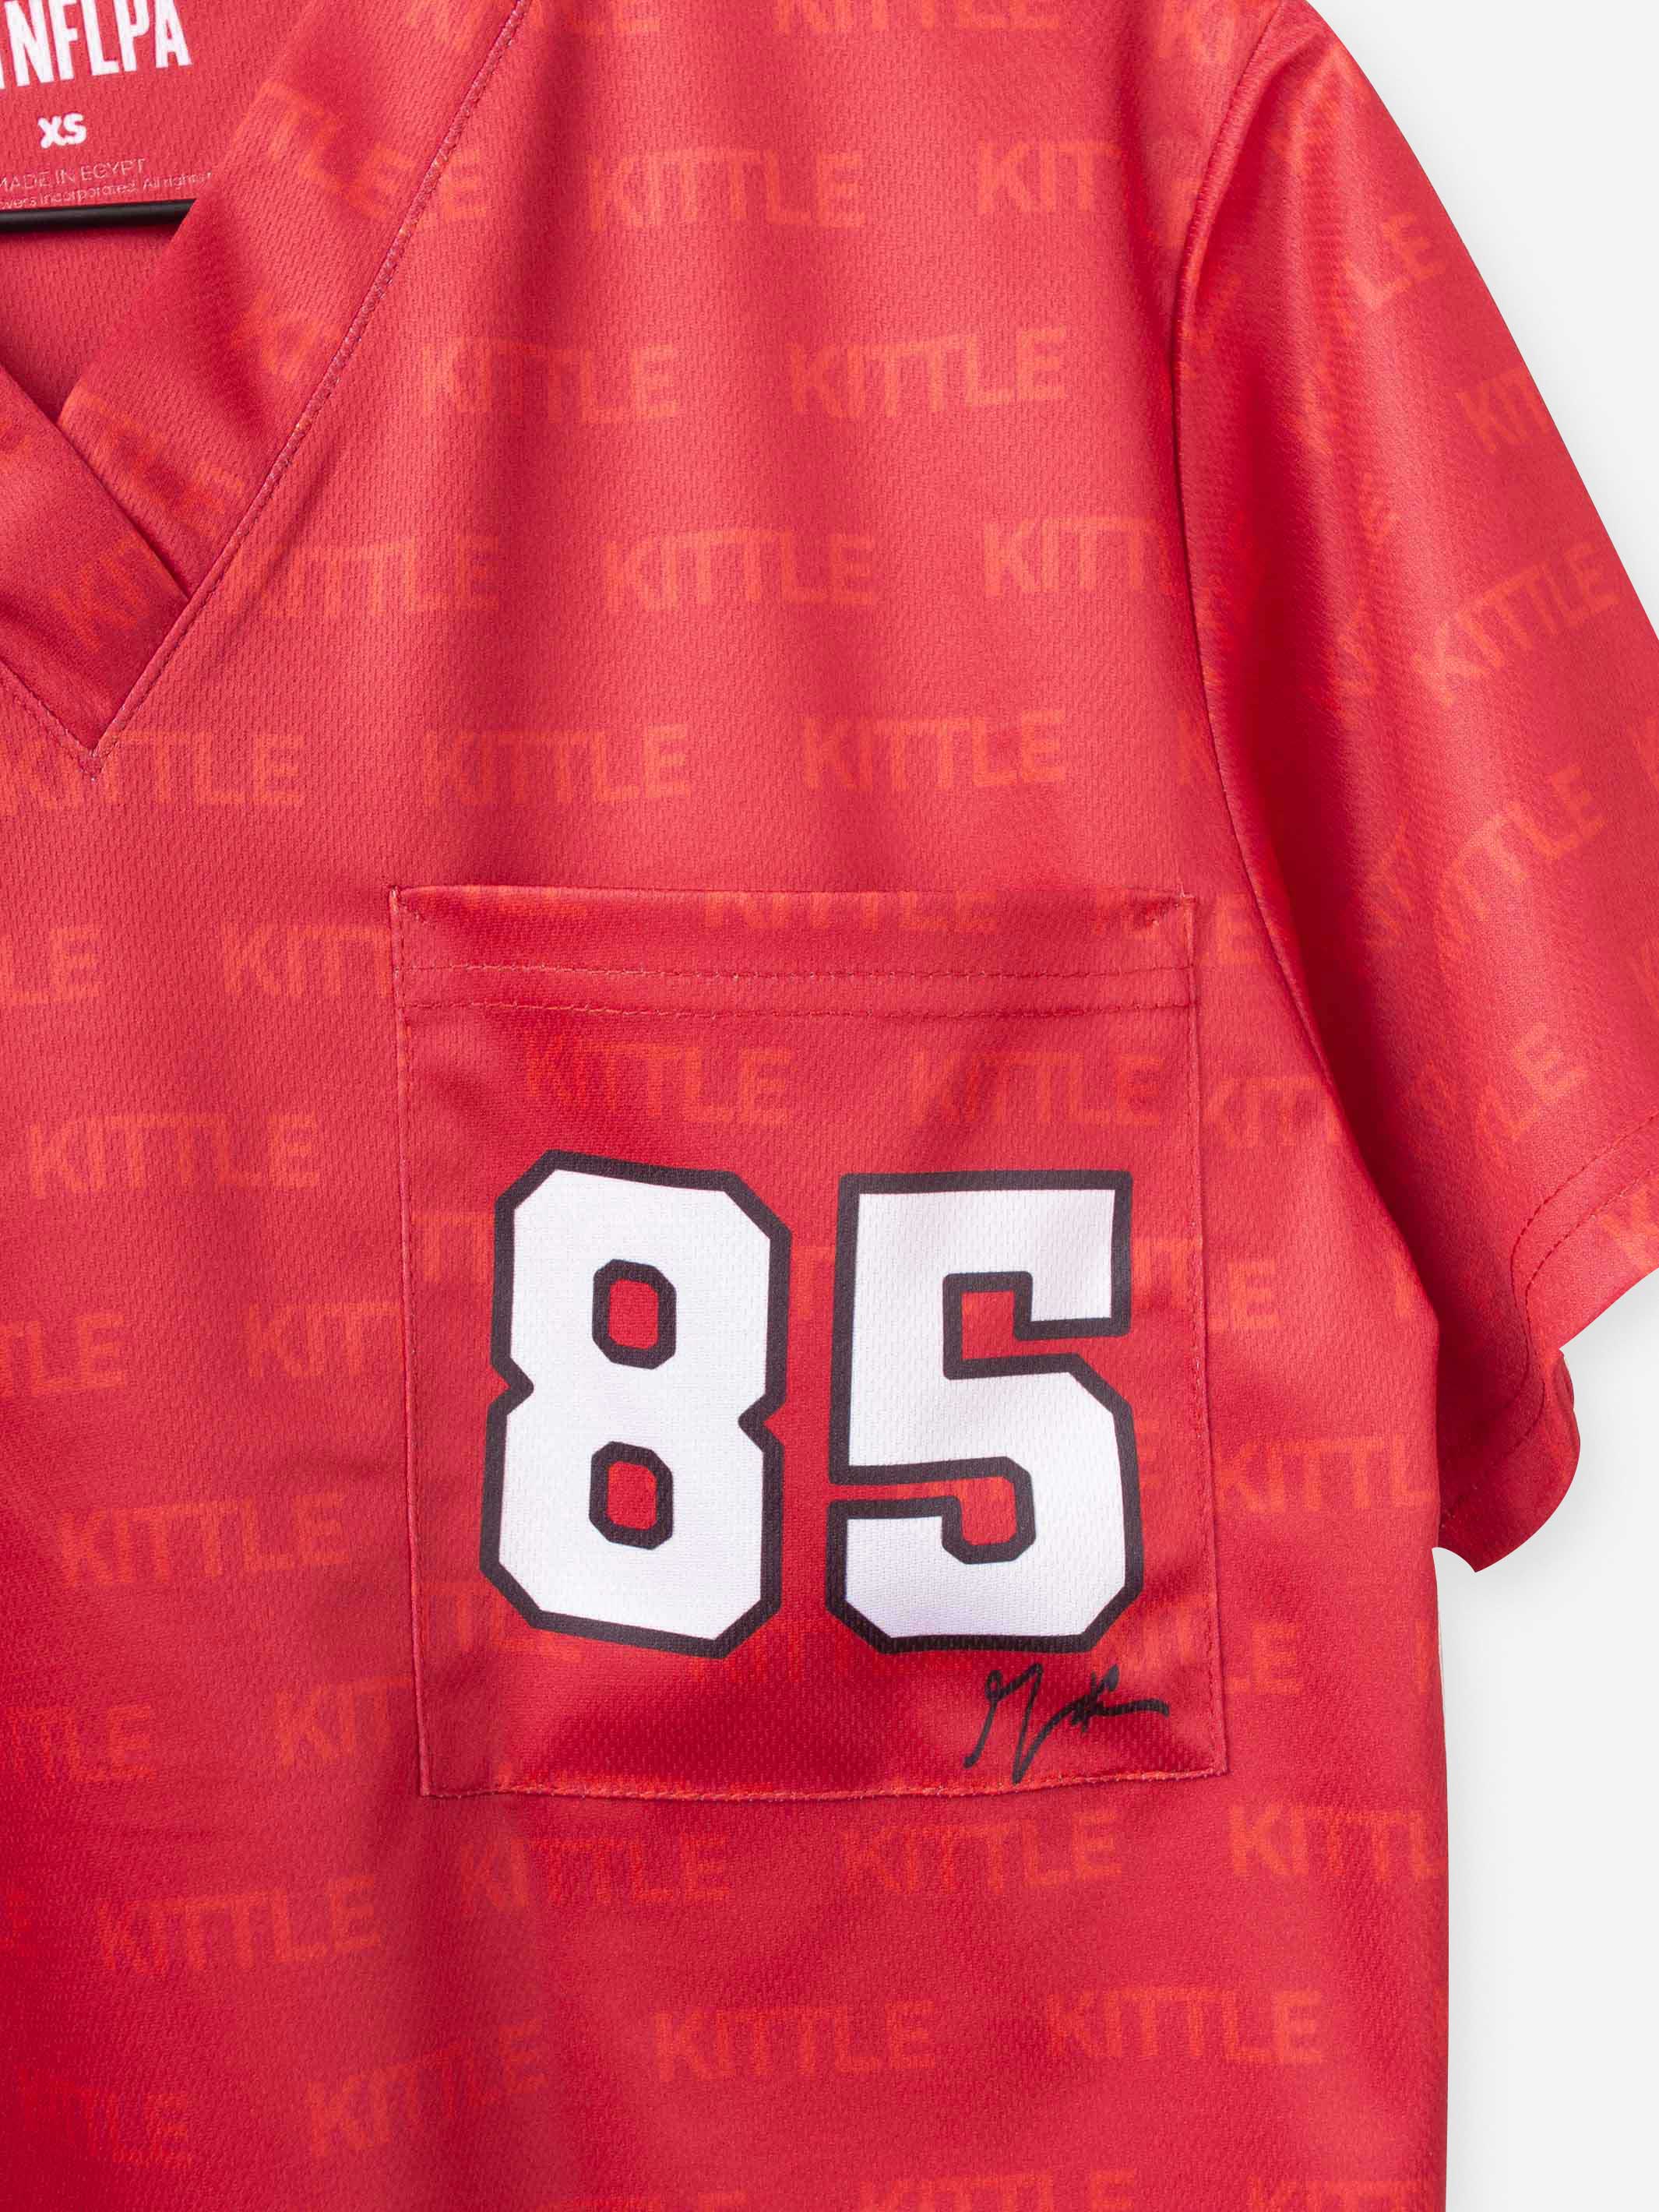 Men's George Kittle Scrub Top Jersey with athletic mesh fabric